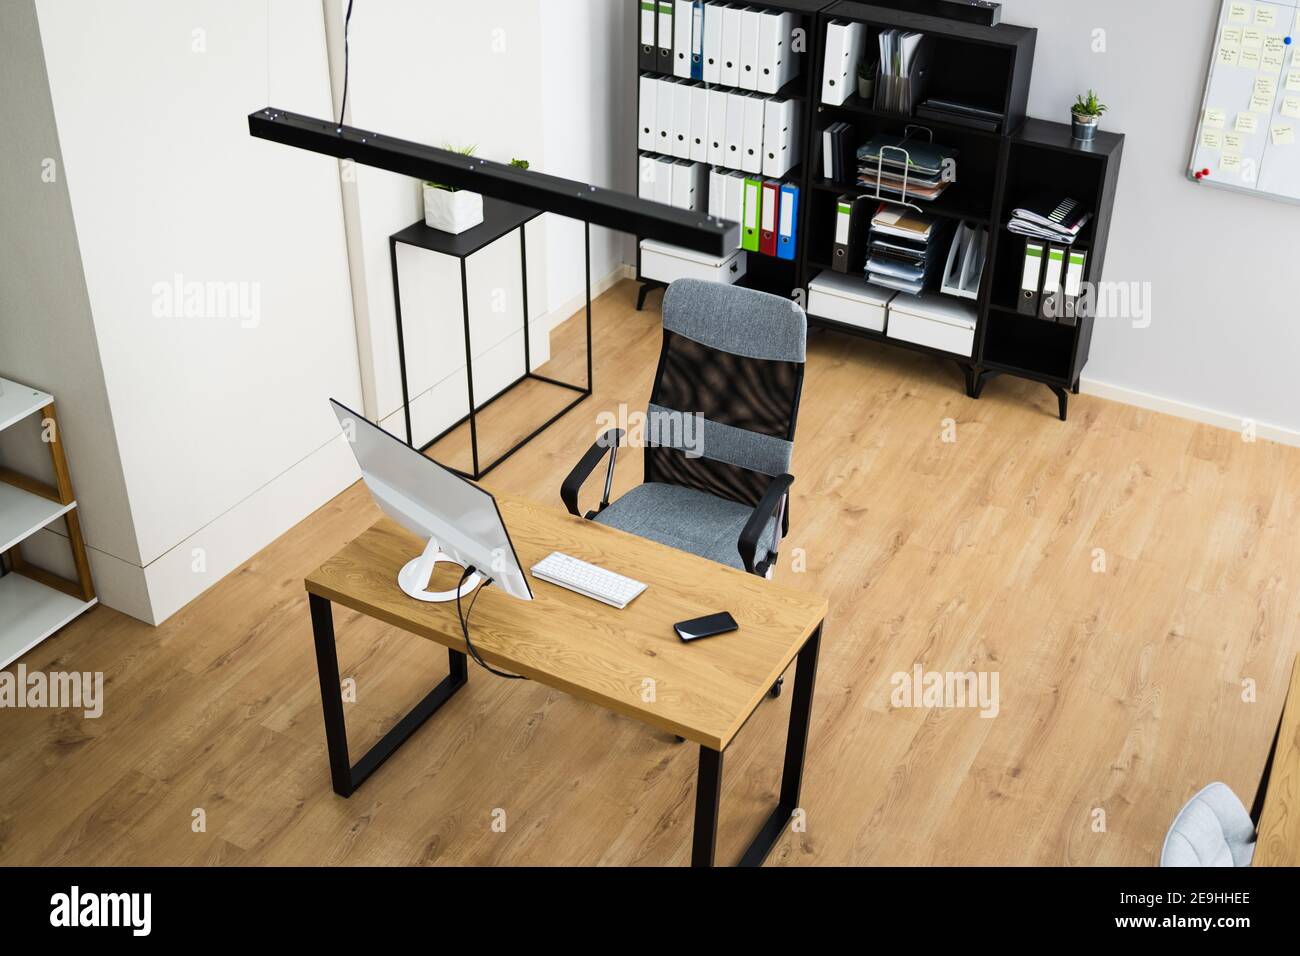 Corporate Business Office Room Interior And Chair Stock Photo